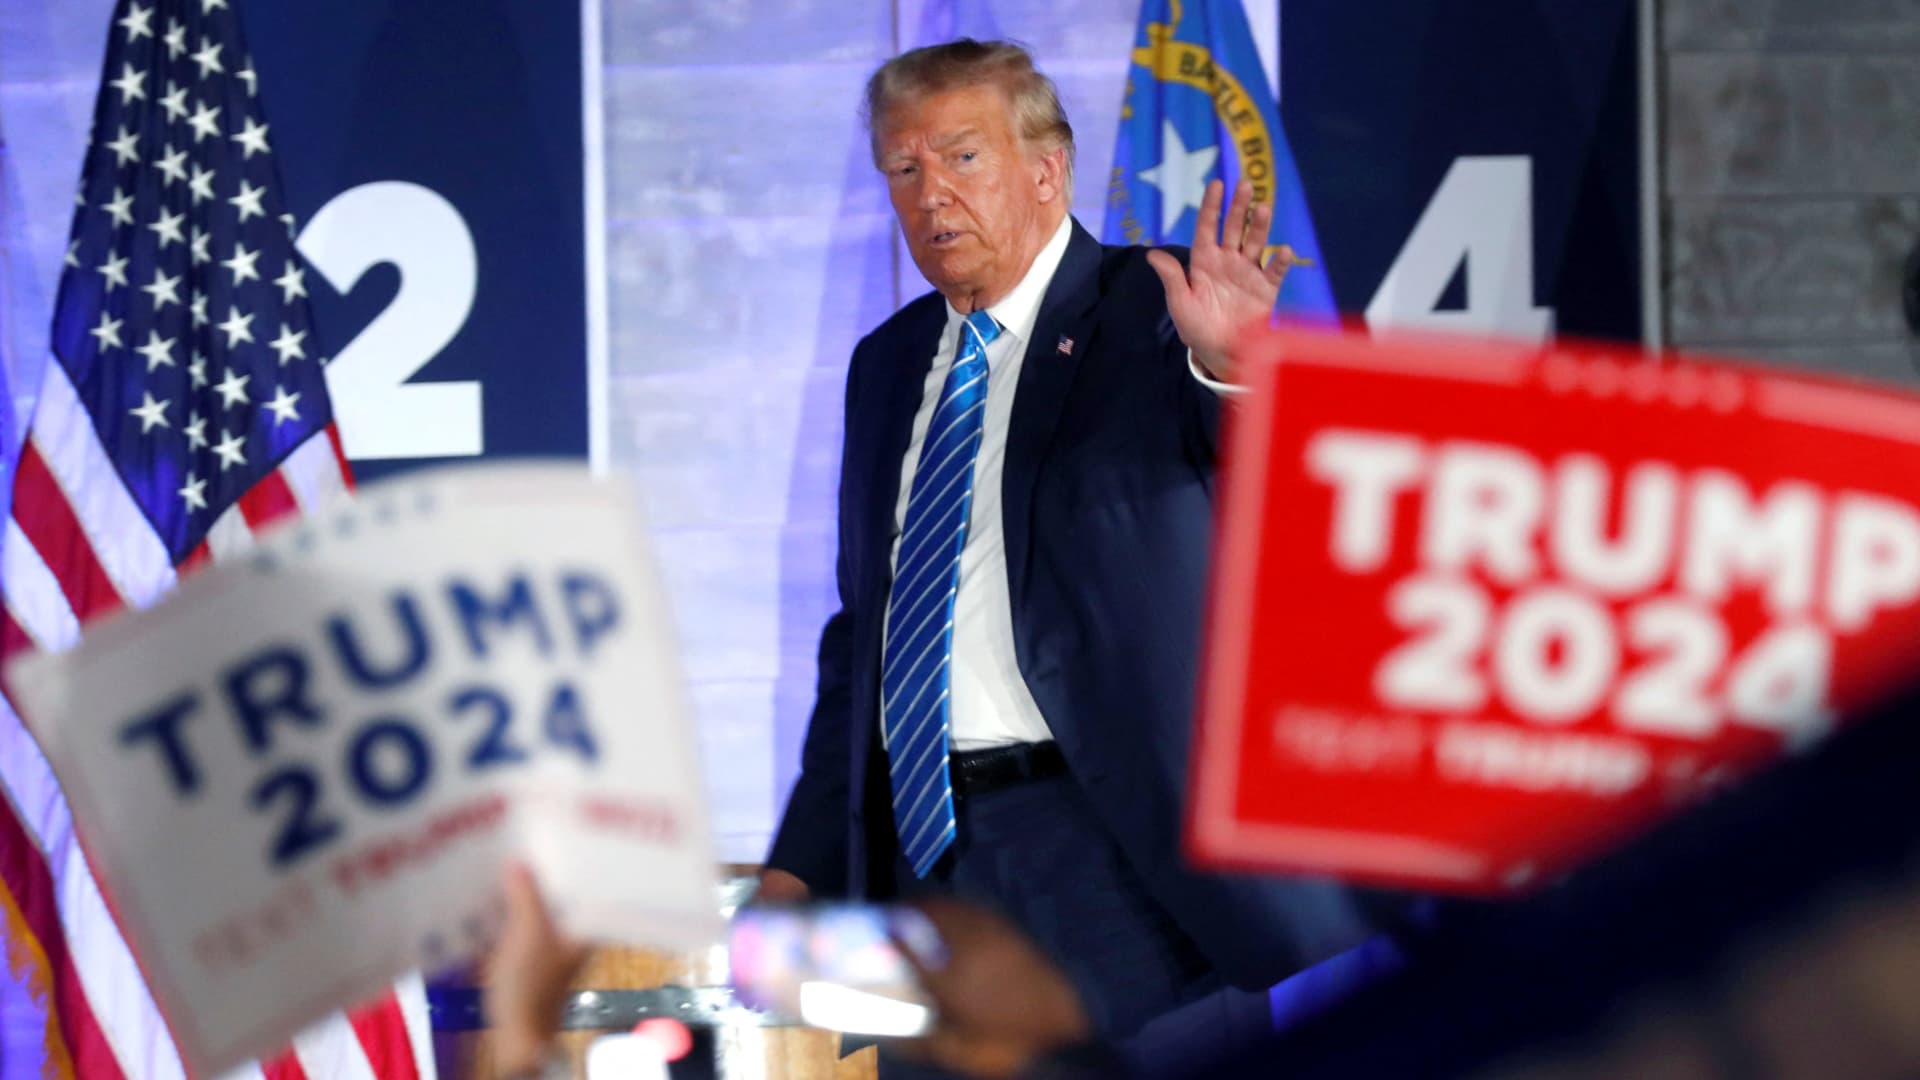 Former U.S. President Donald J. Trump leaves the stage after speaking to supporters at a Team Trump Nevada Commit to Caucus rally in Las Vegas, Nevada, U.S. October 28, 2023. 